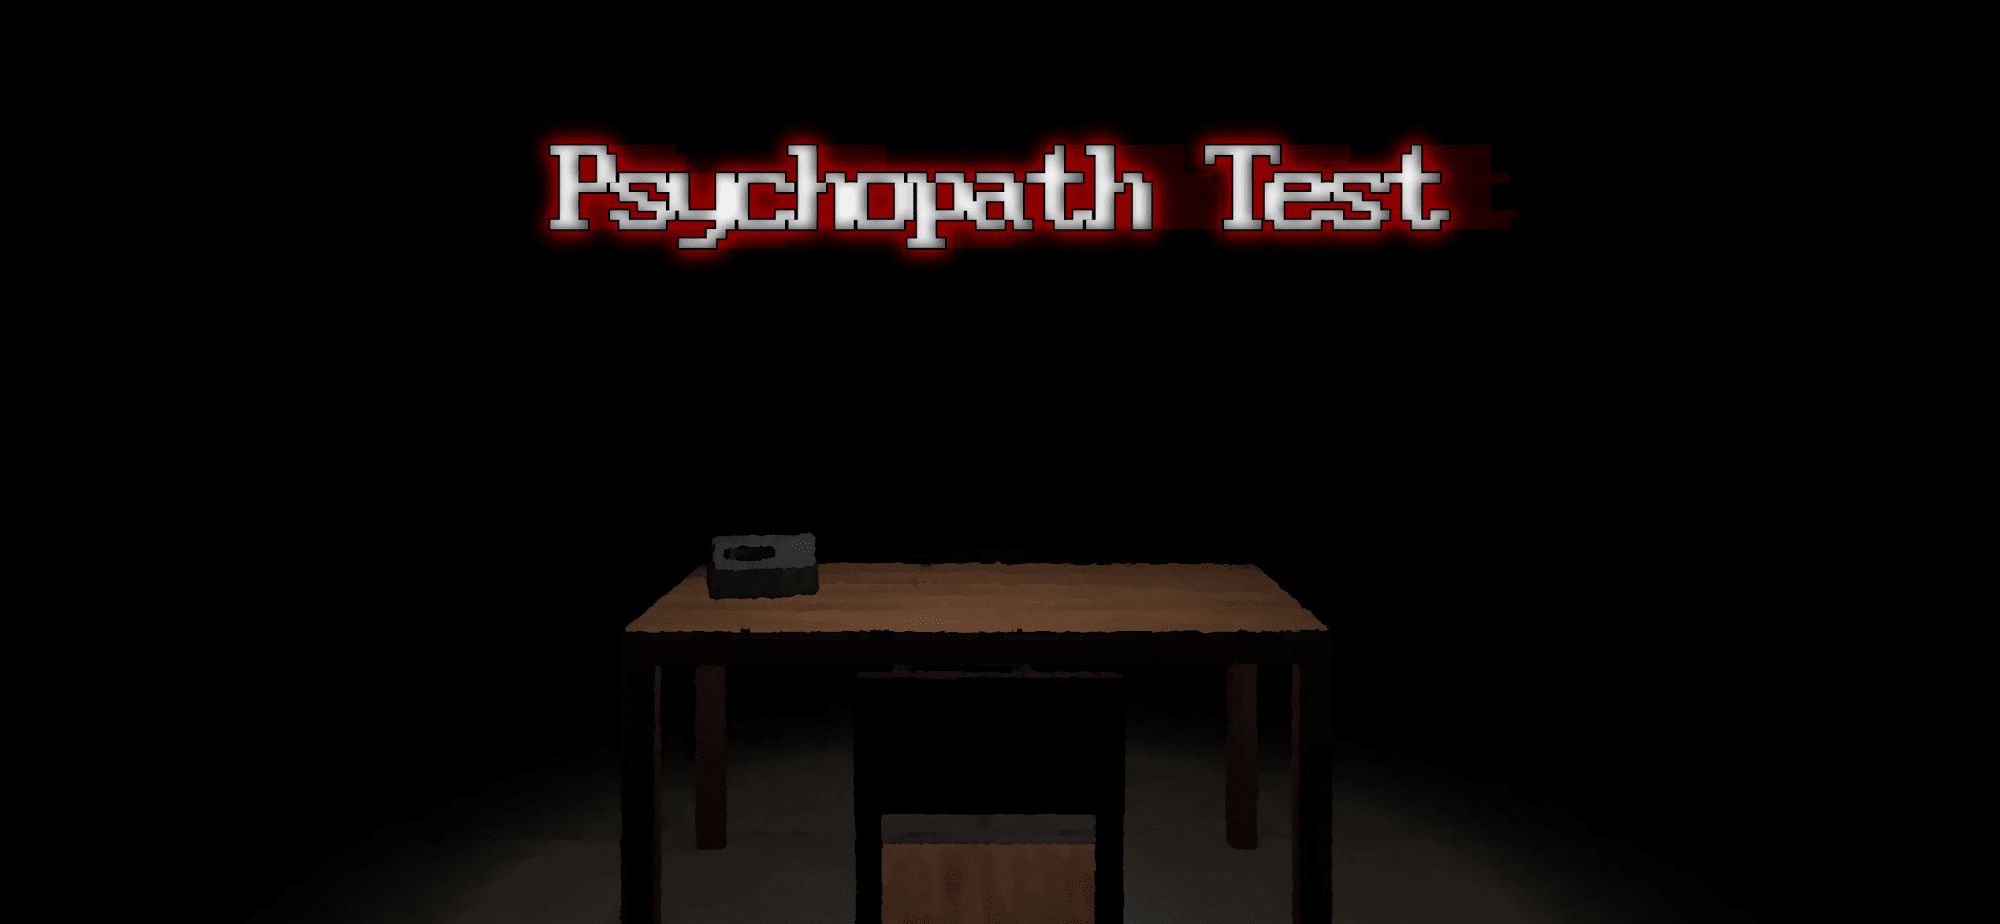 Download Psychopath Test Android free game.